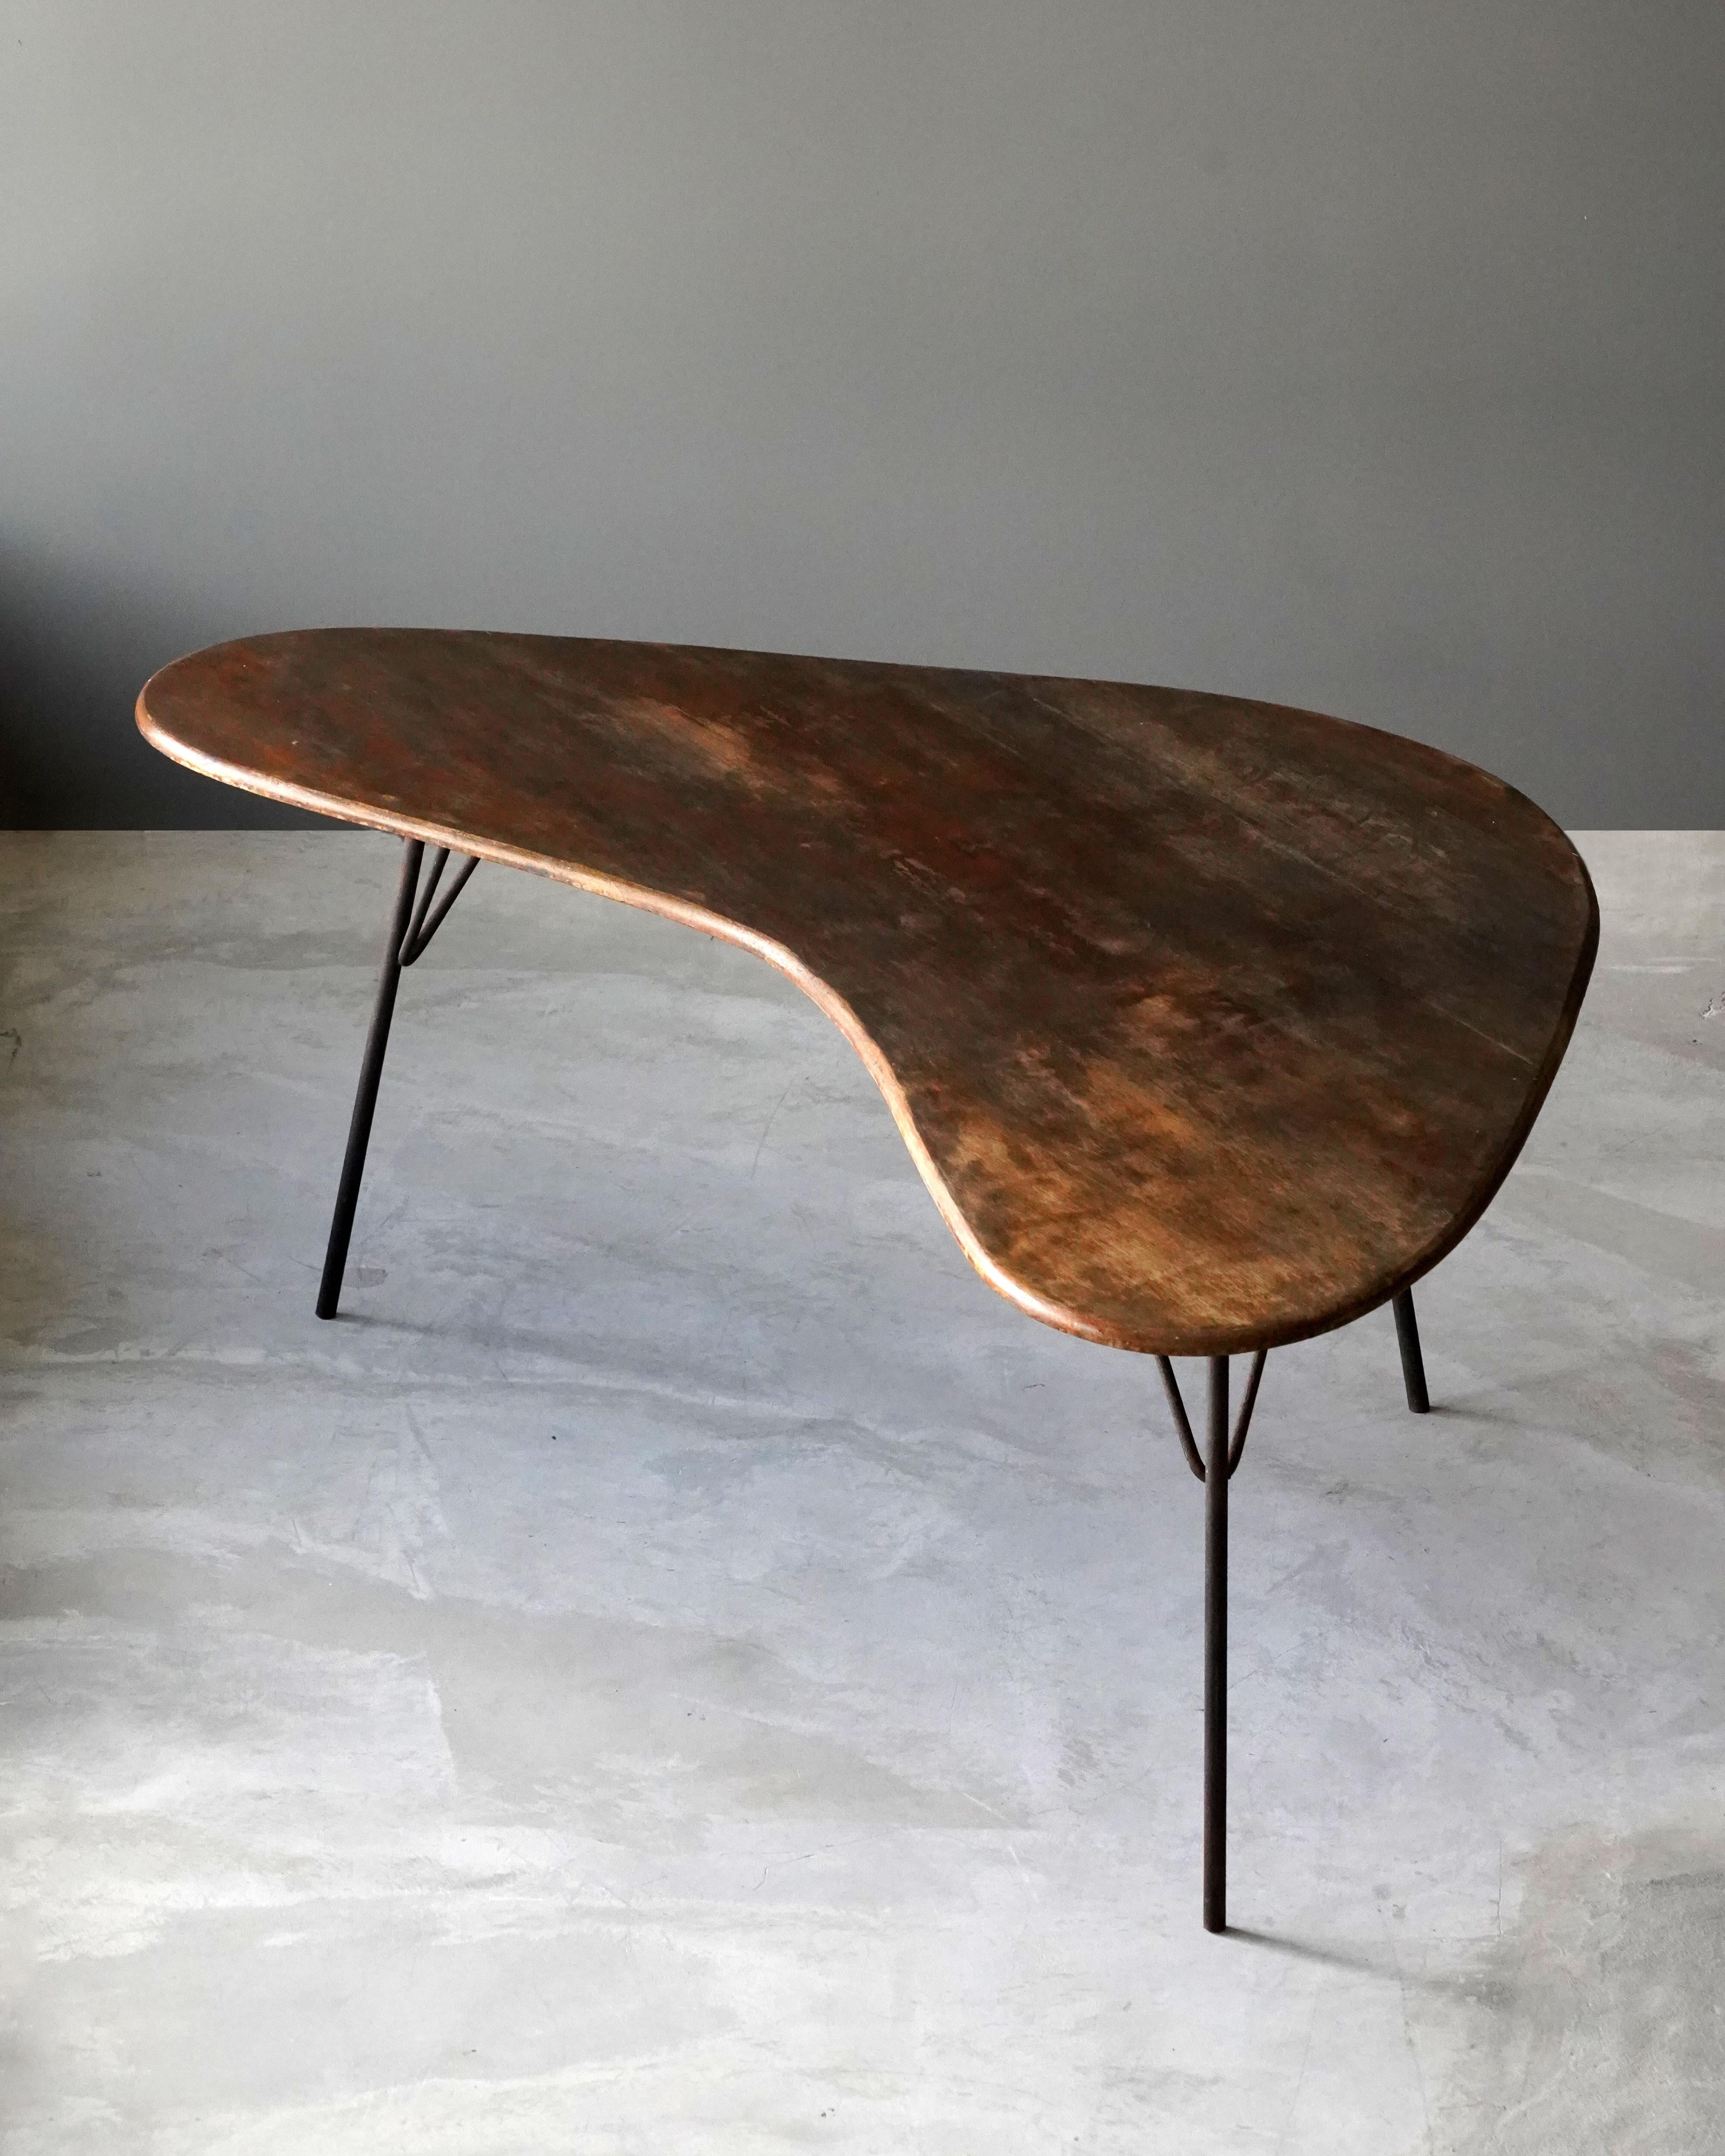 An organic or freeform table or writing table or desk. By an unknown designer, 1950s, America. 

Other designers of the period include George Nakashima, Isamu Noguchi, Charlotte Perriand, Vladimir Kagan, and Paul Frankl.